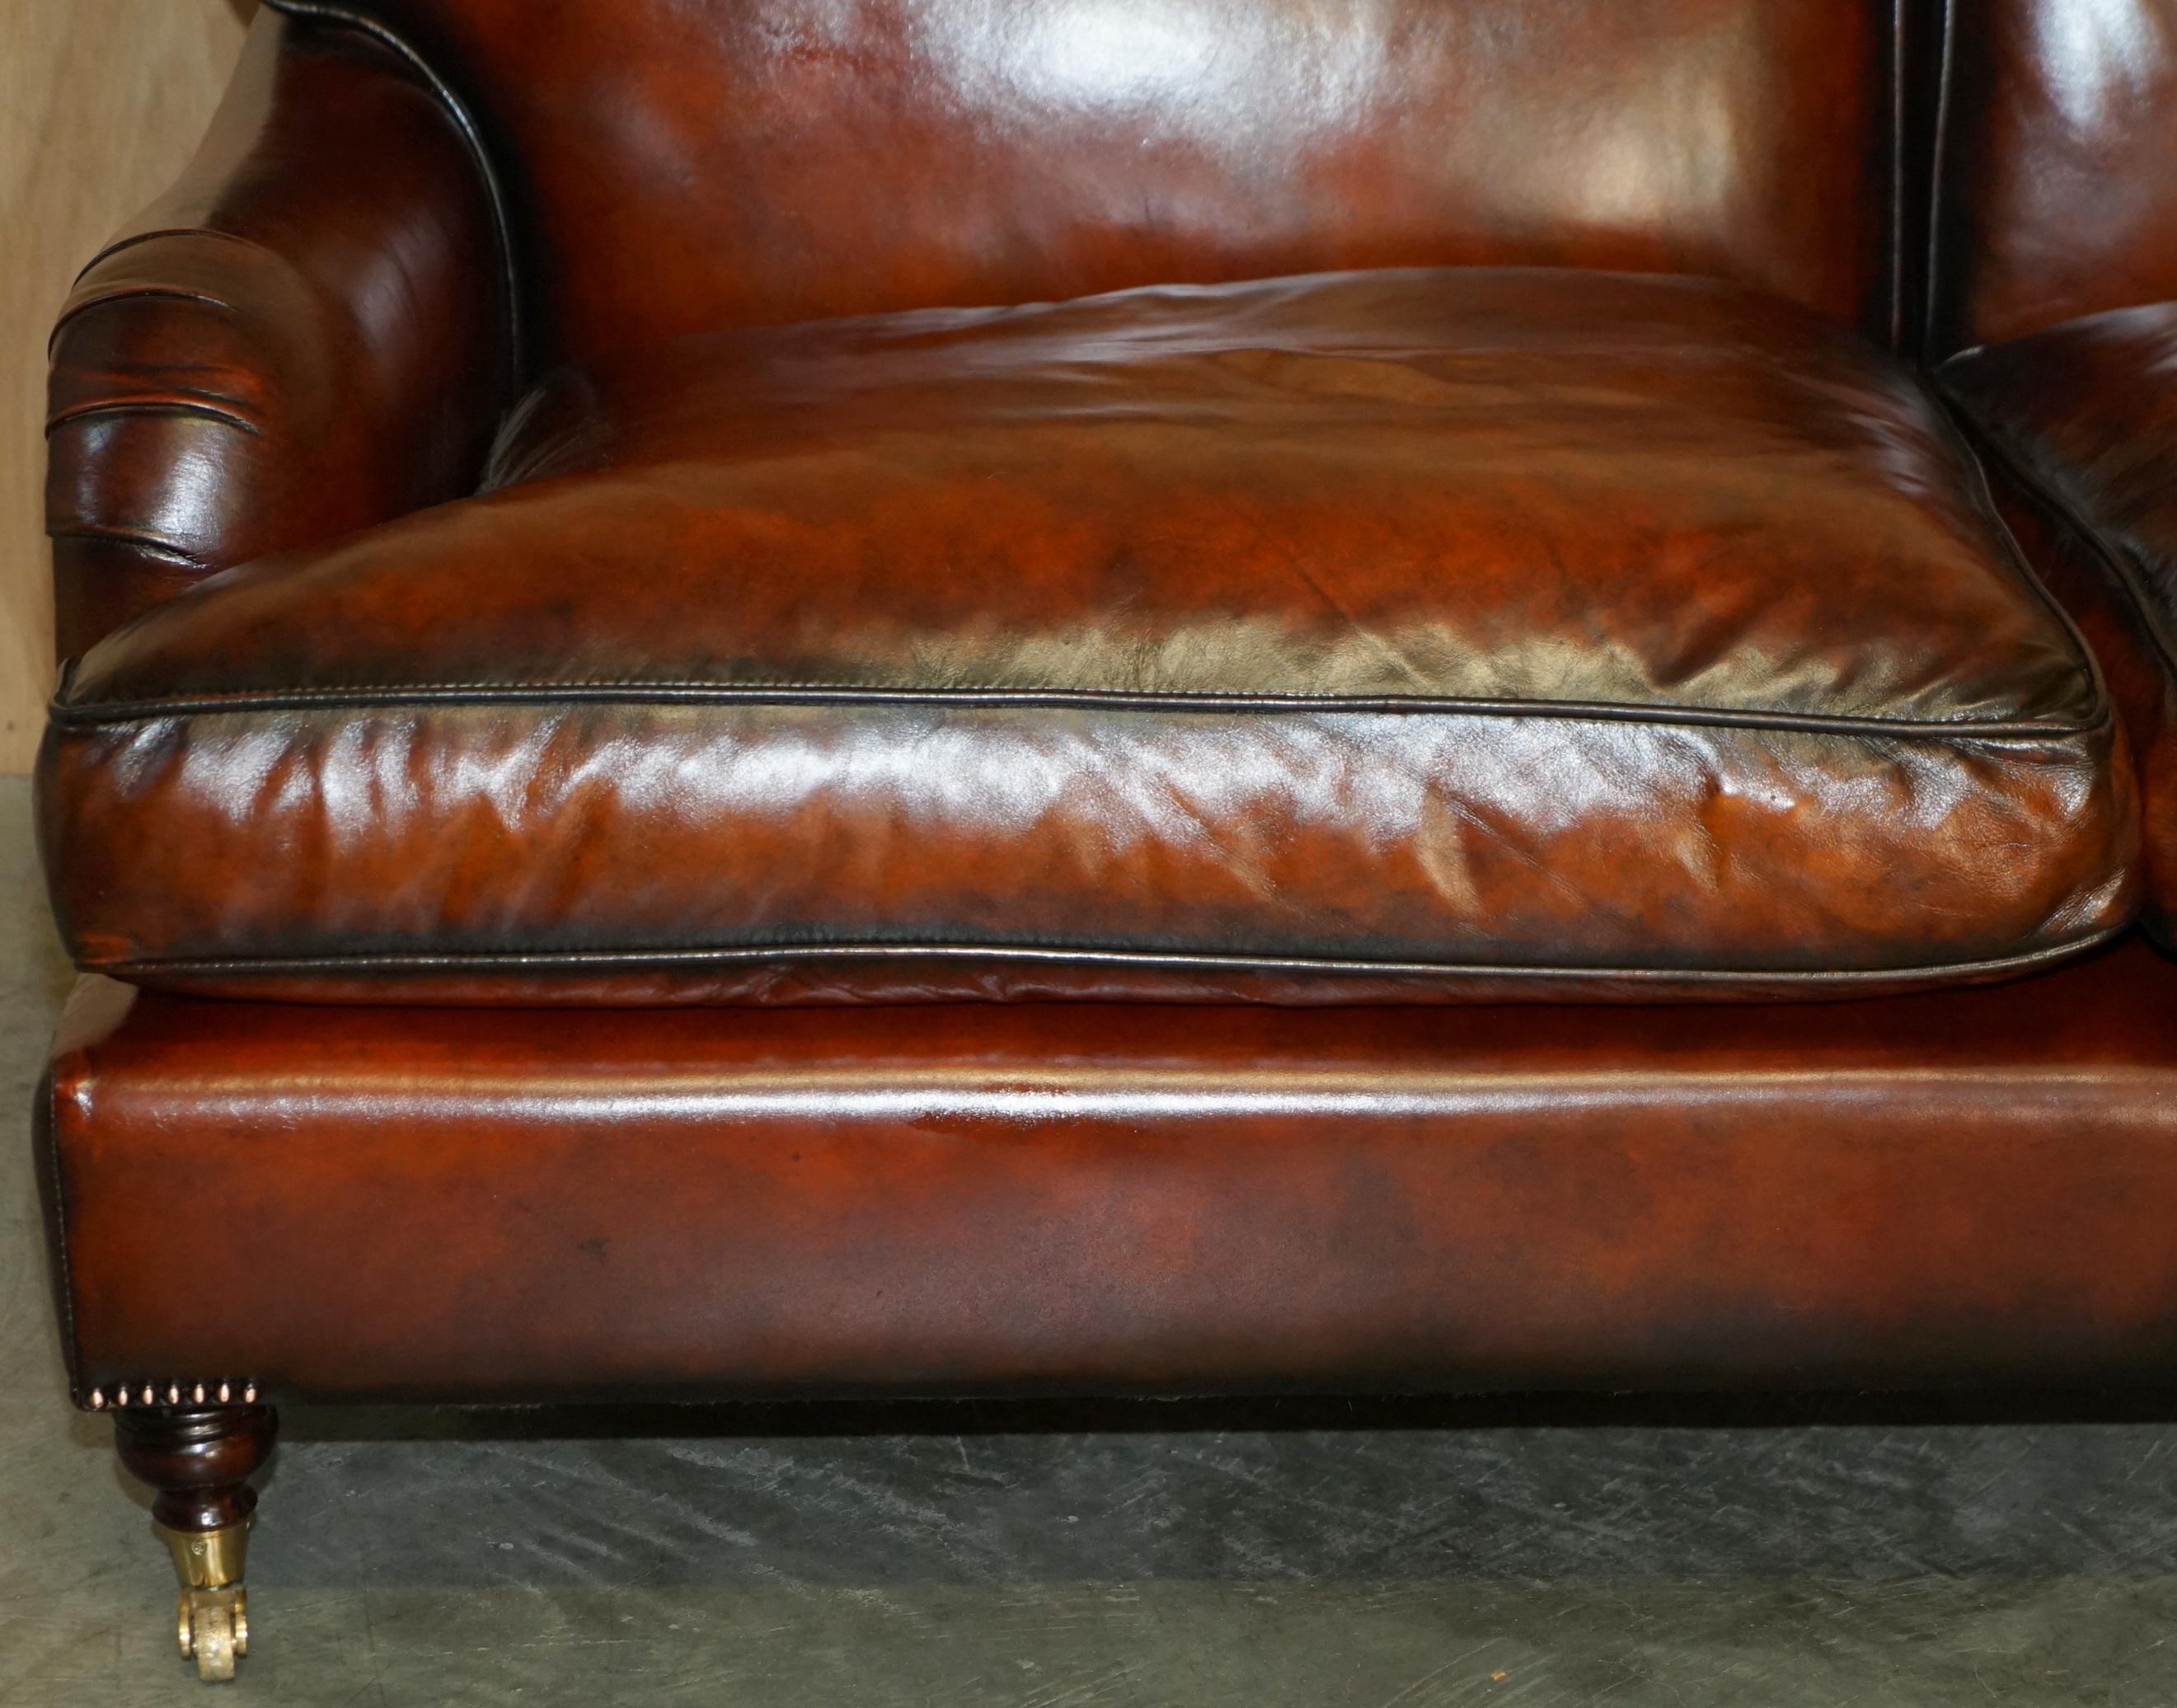 Hand-Crafted RESTORED GEORGE SMITH HOWARD & SON'S STYLE BROWN LEATHER SiGNATURE SCROLL SOFA